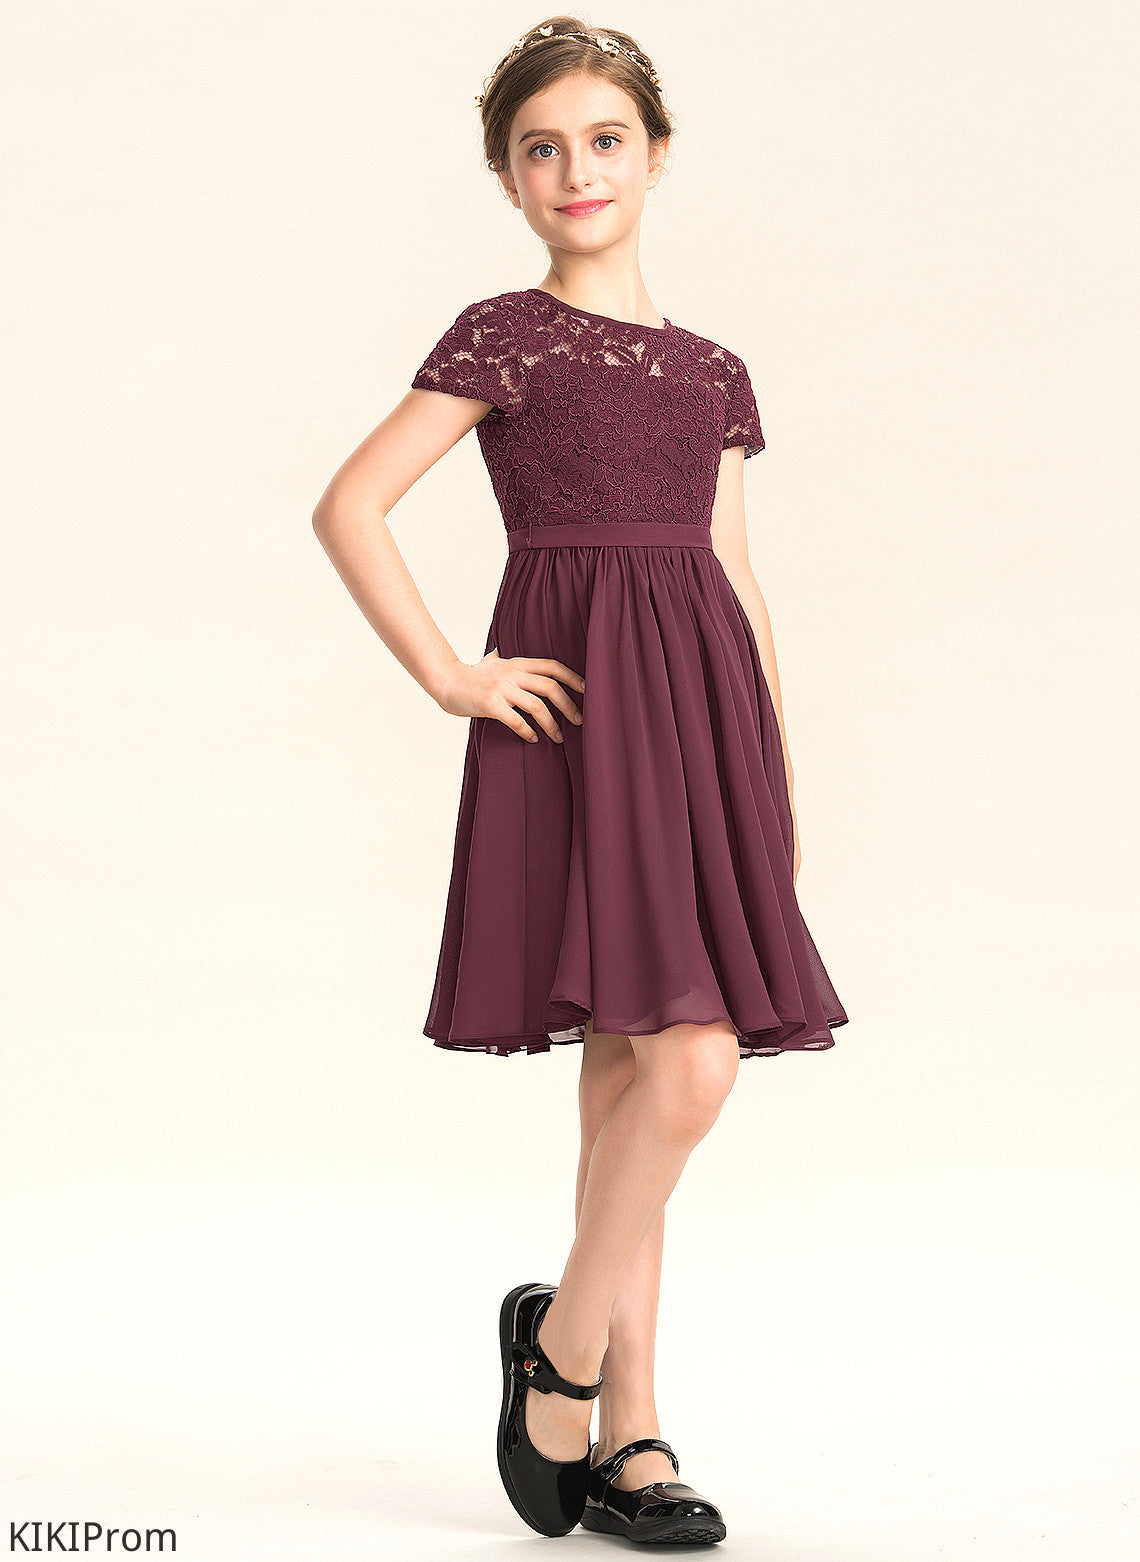 Scoop Neck Junior Bridesmaid Dresses Lace With Bow(s) Chiffon Knee-Length Gianna A-Line